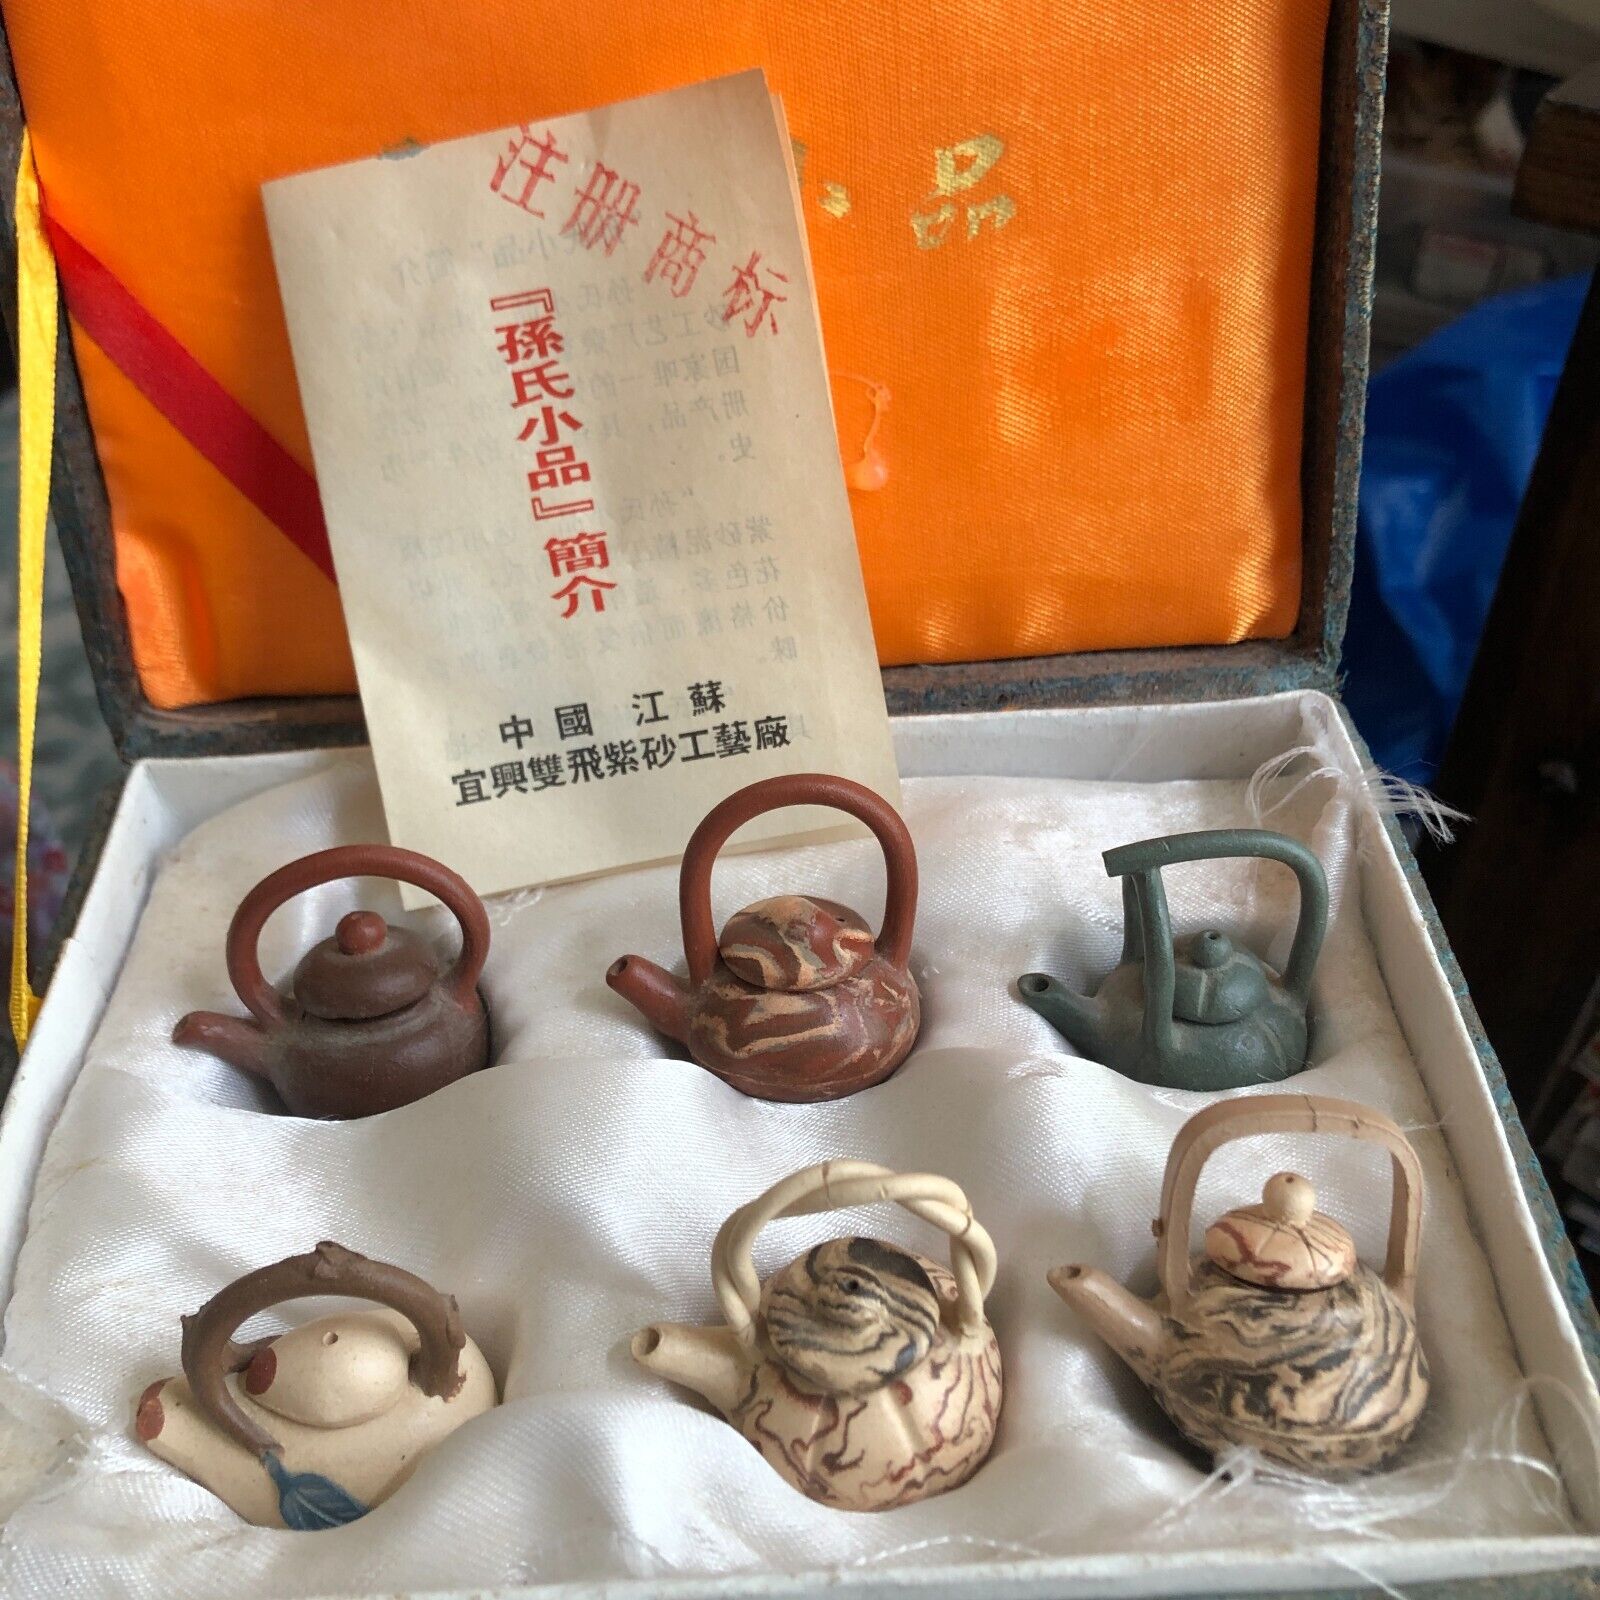 VTG Yixing Teapots Miniature Tea Set of 6 Chinese Clay Pottery w/ Case HTF Rare